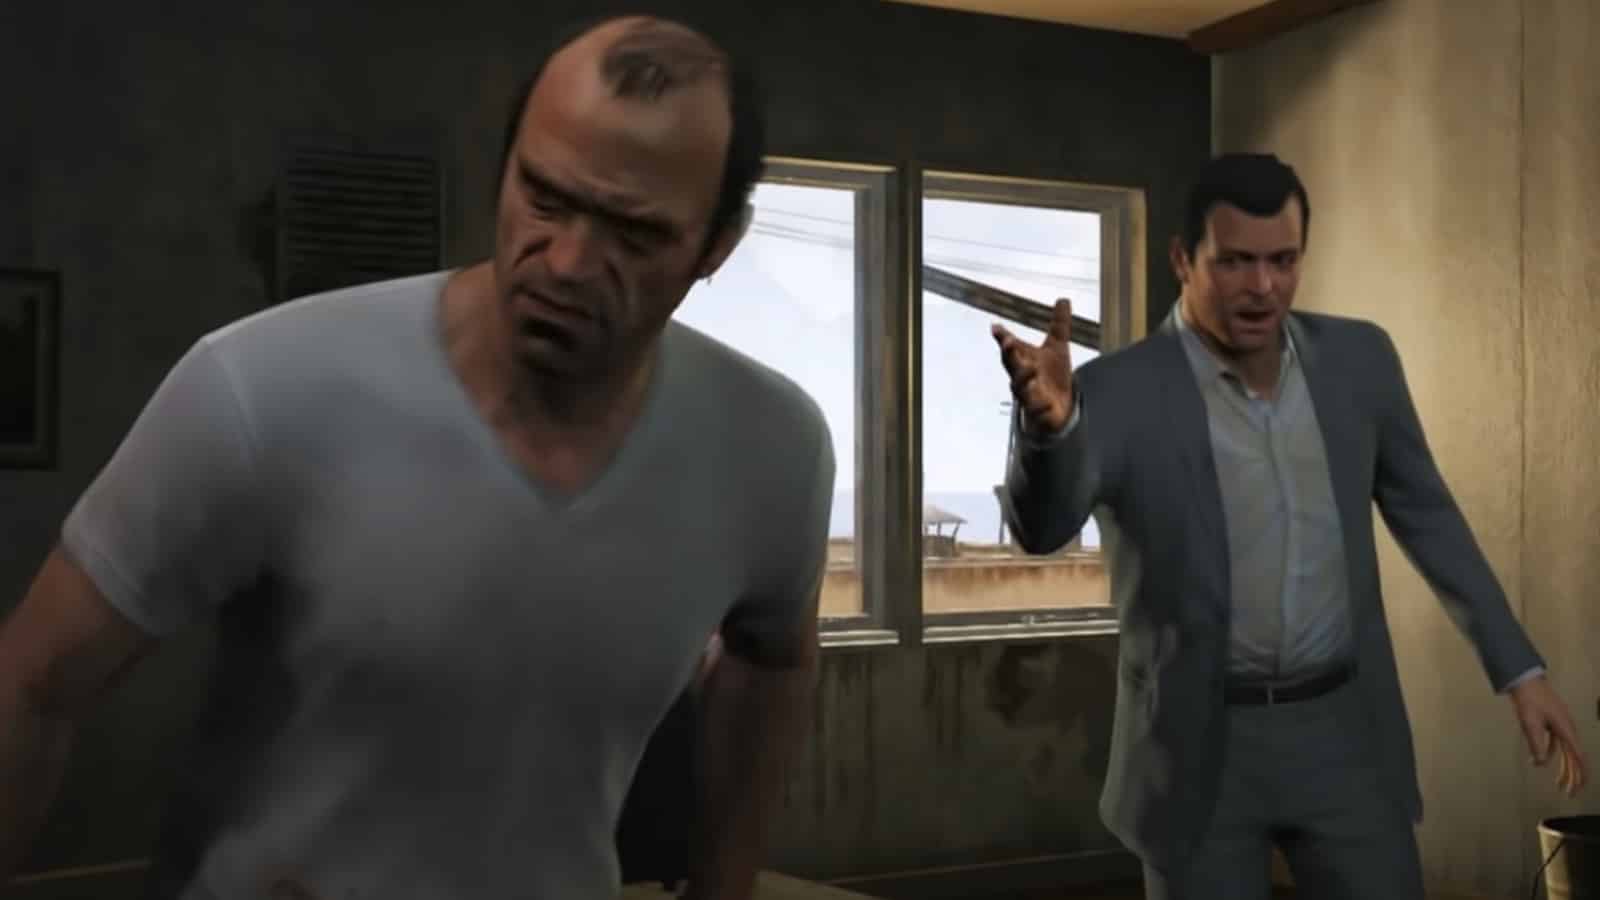 This mod will let you play the entirety of GTA 5 in VR